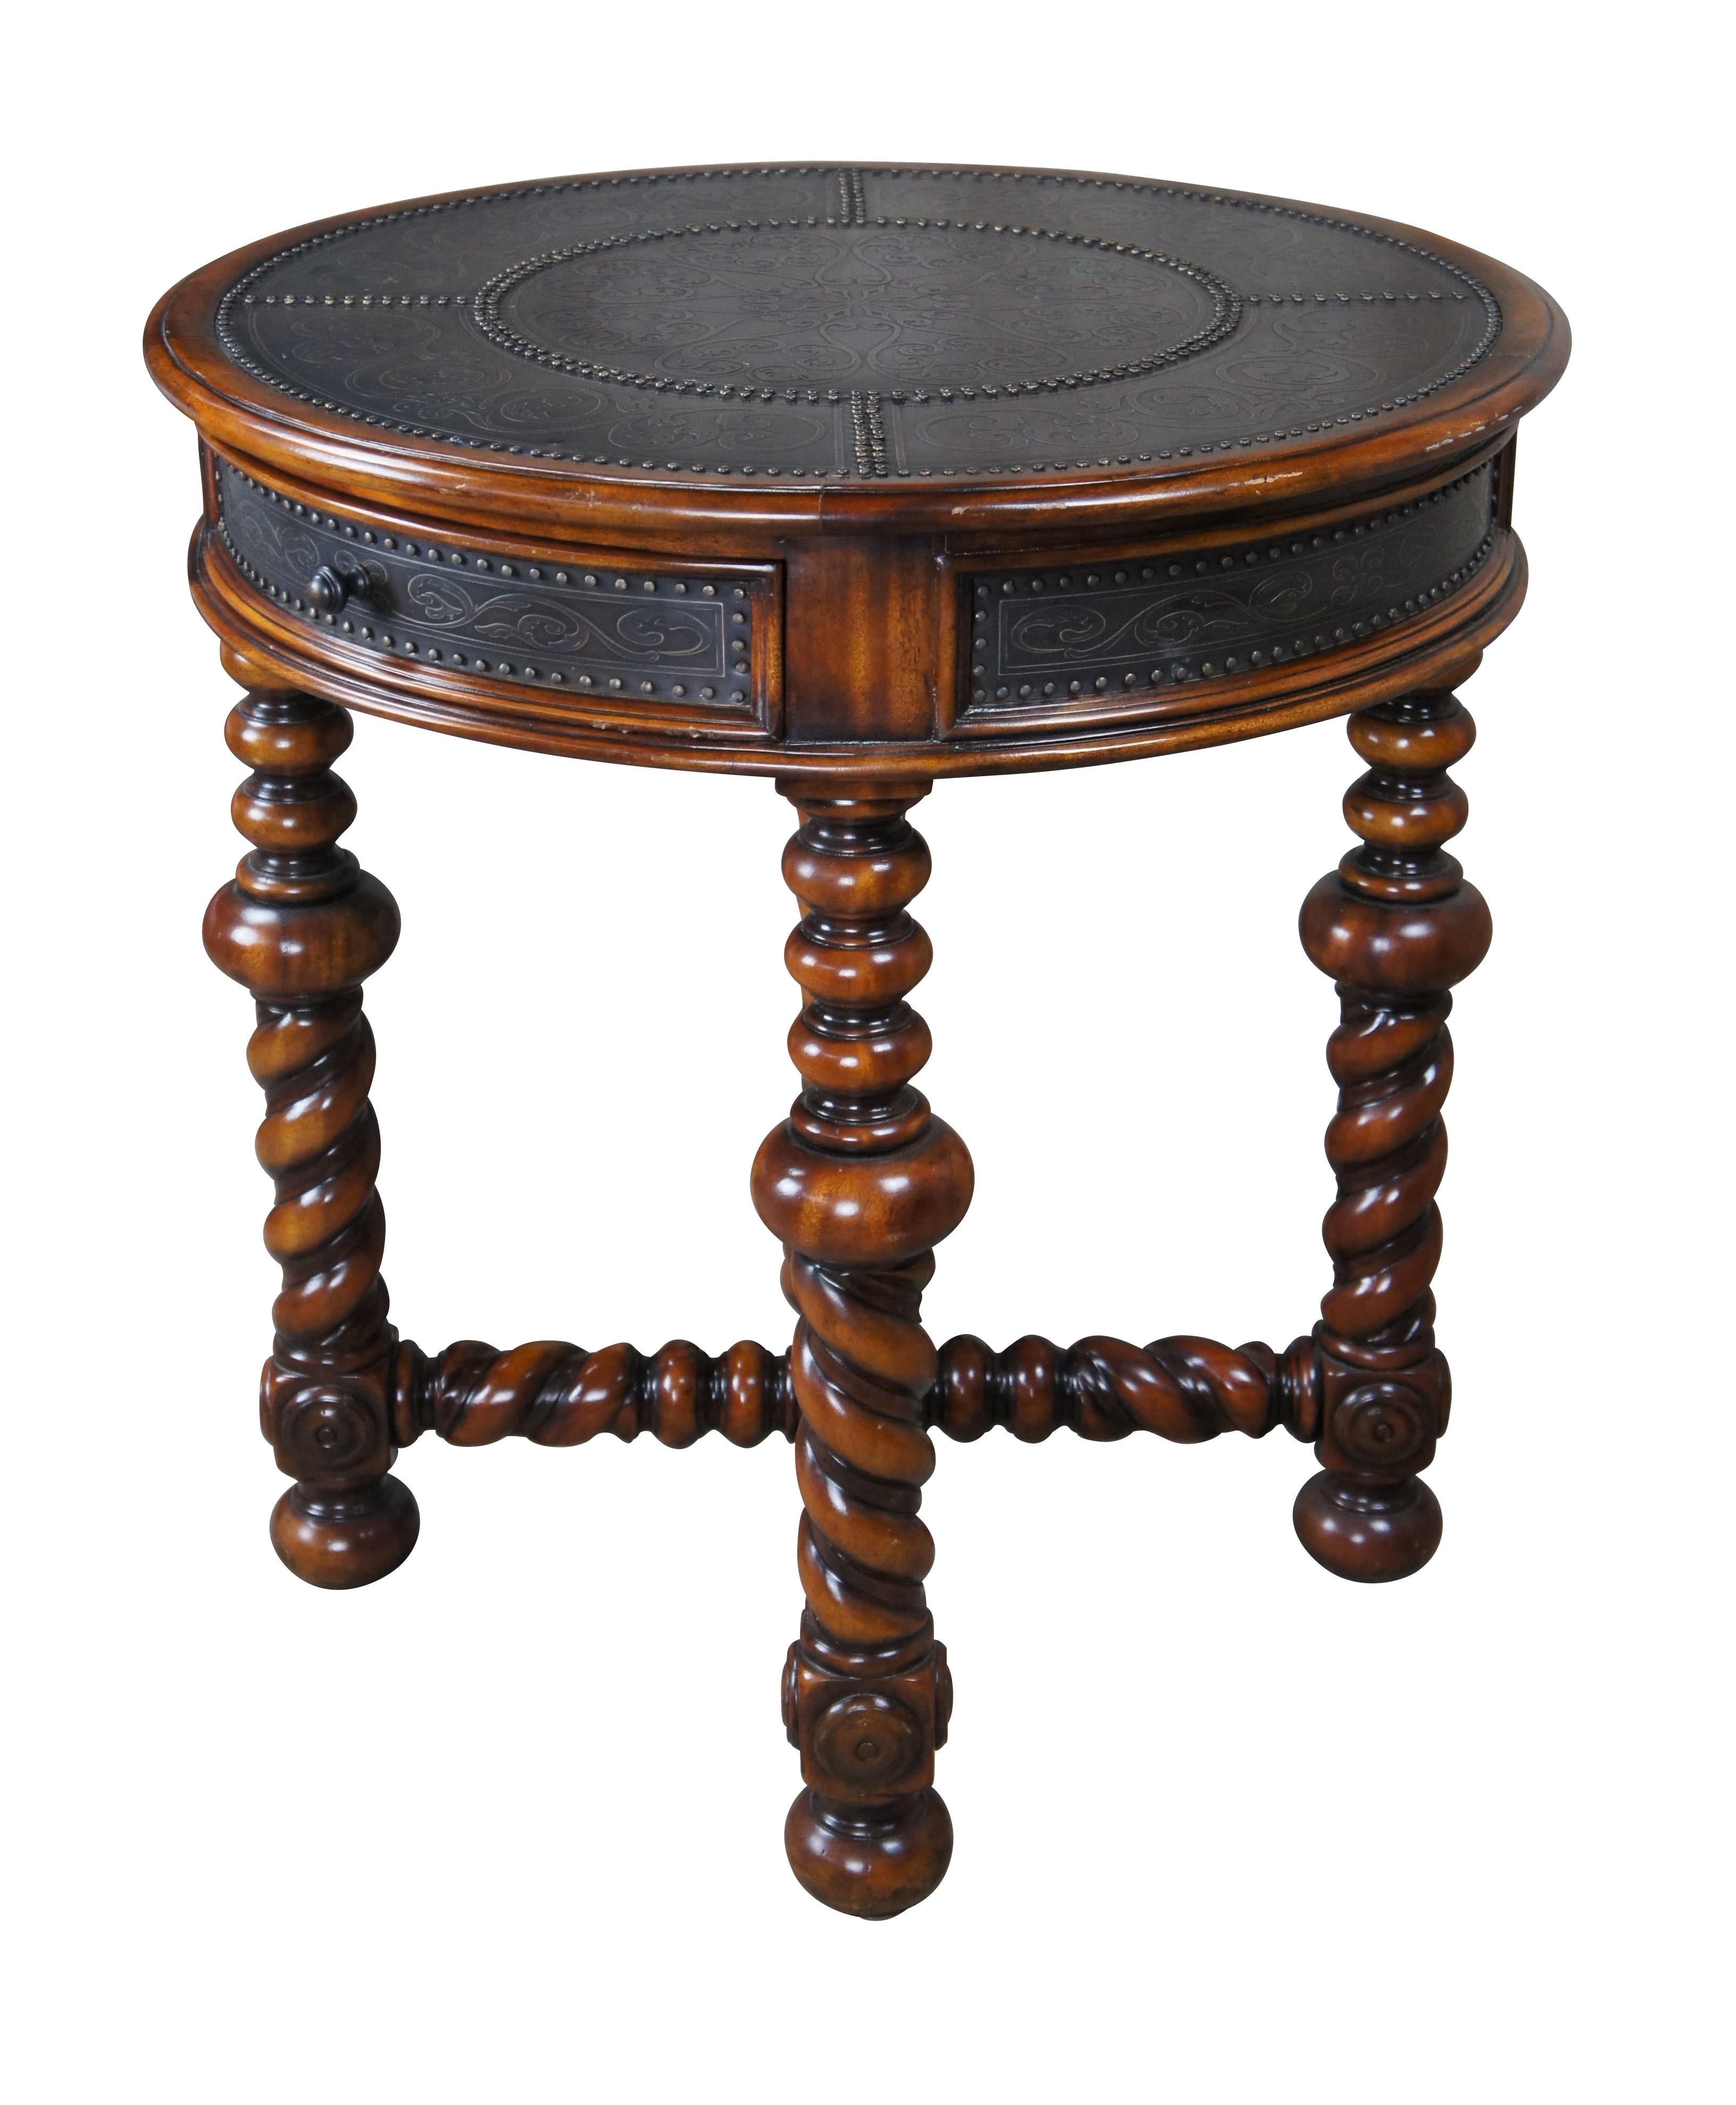 A solid mahogany and brass engraved circular lamp table by Theodore Alexander, Circa late 20th Century. Features a frieze drawer, on barley twisted turned legs and stretchers. Includes a turned lower trophy finial and riveted accents. The table is